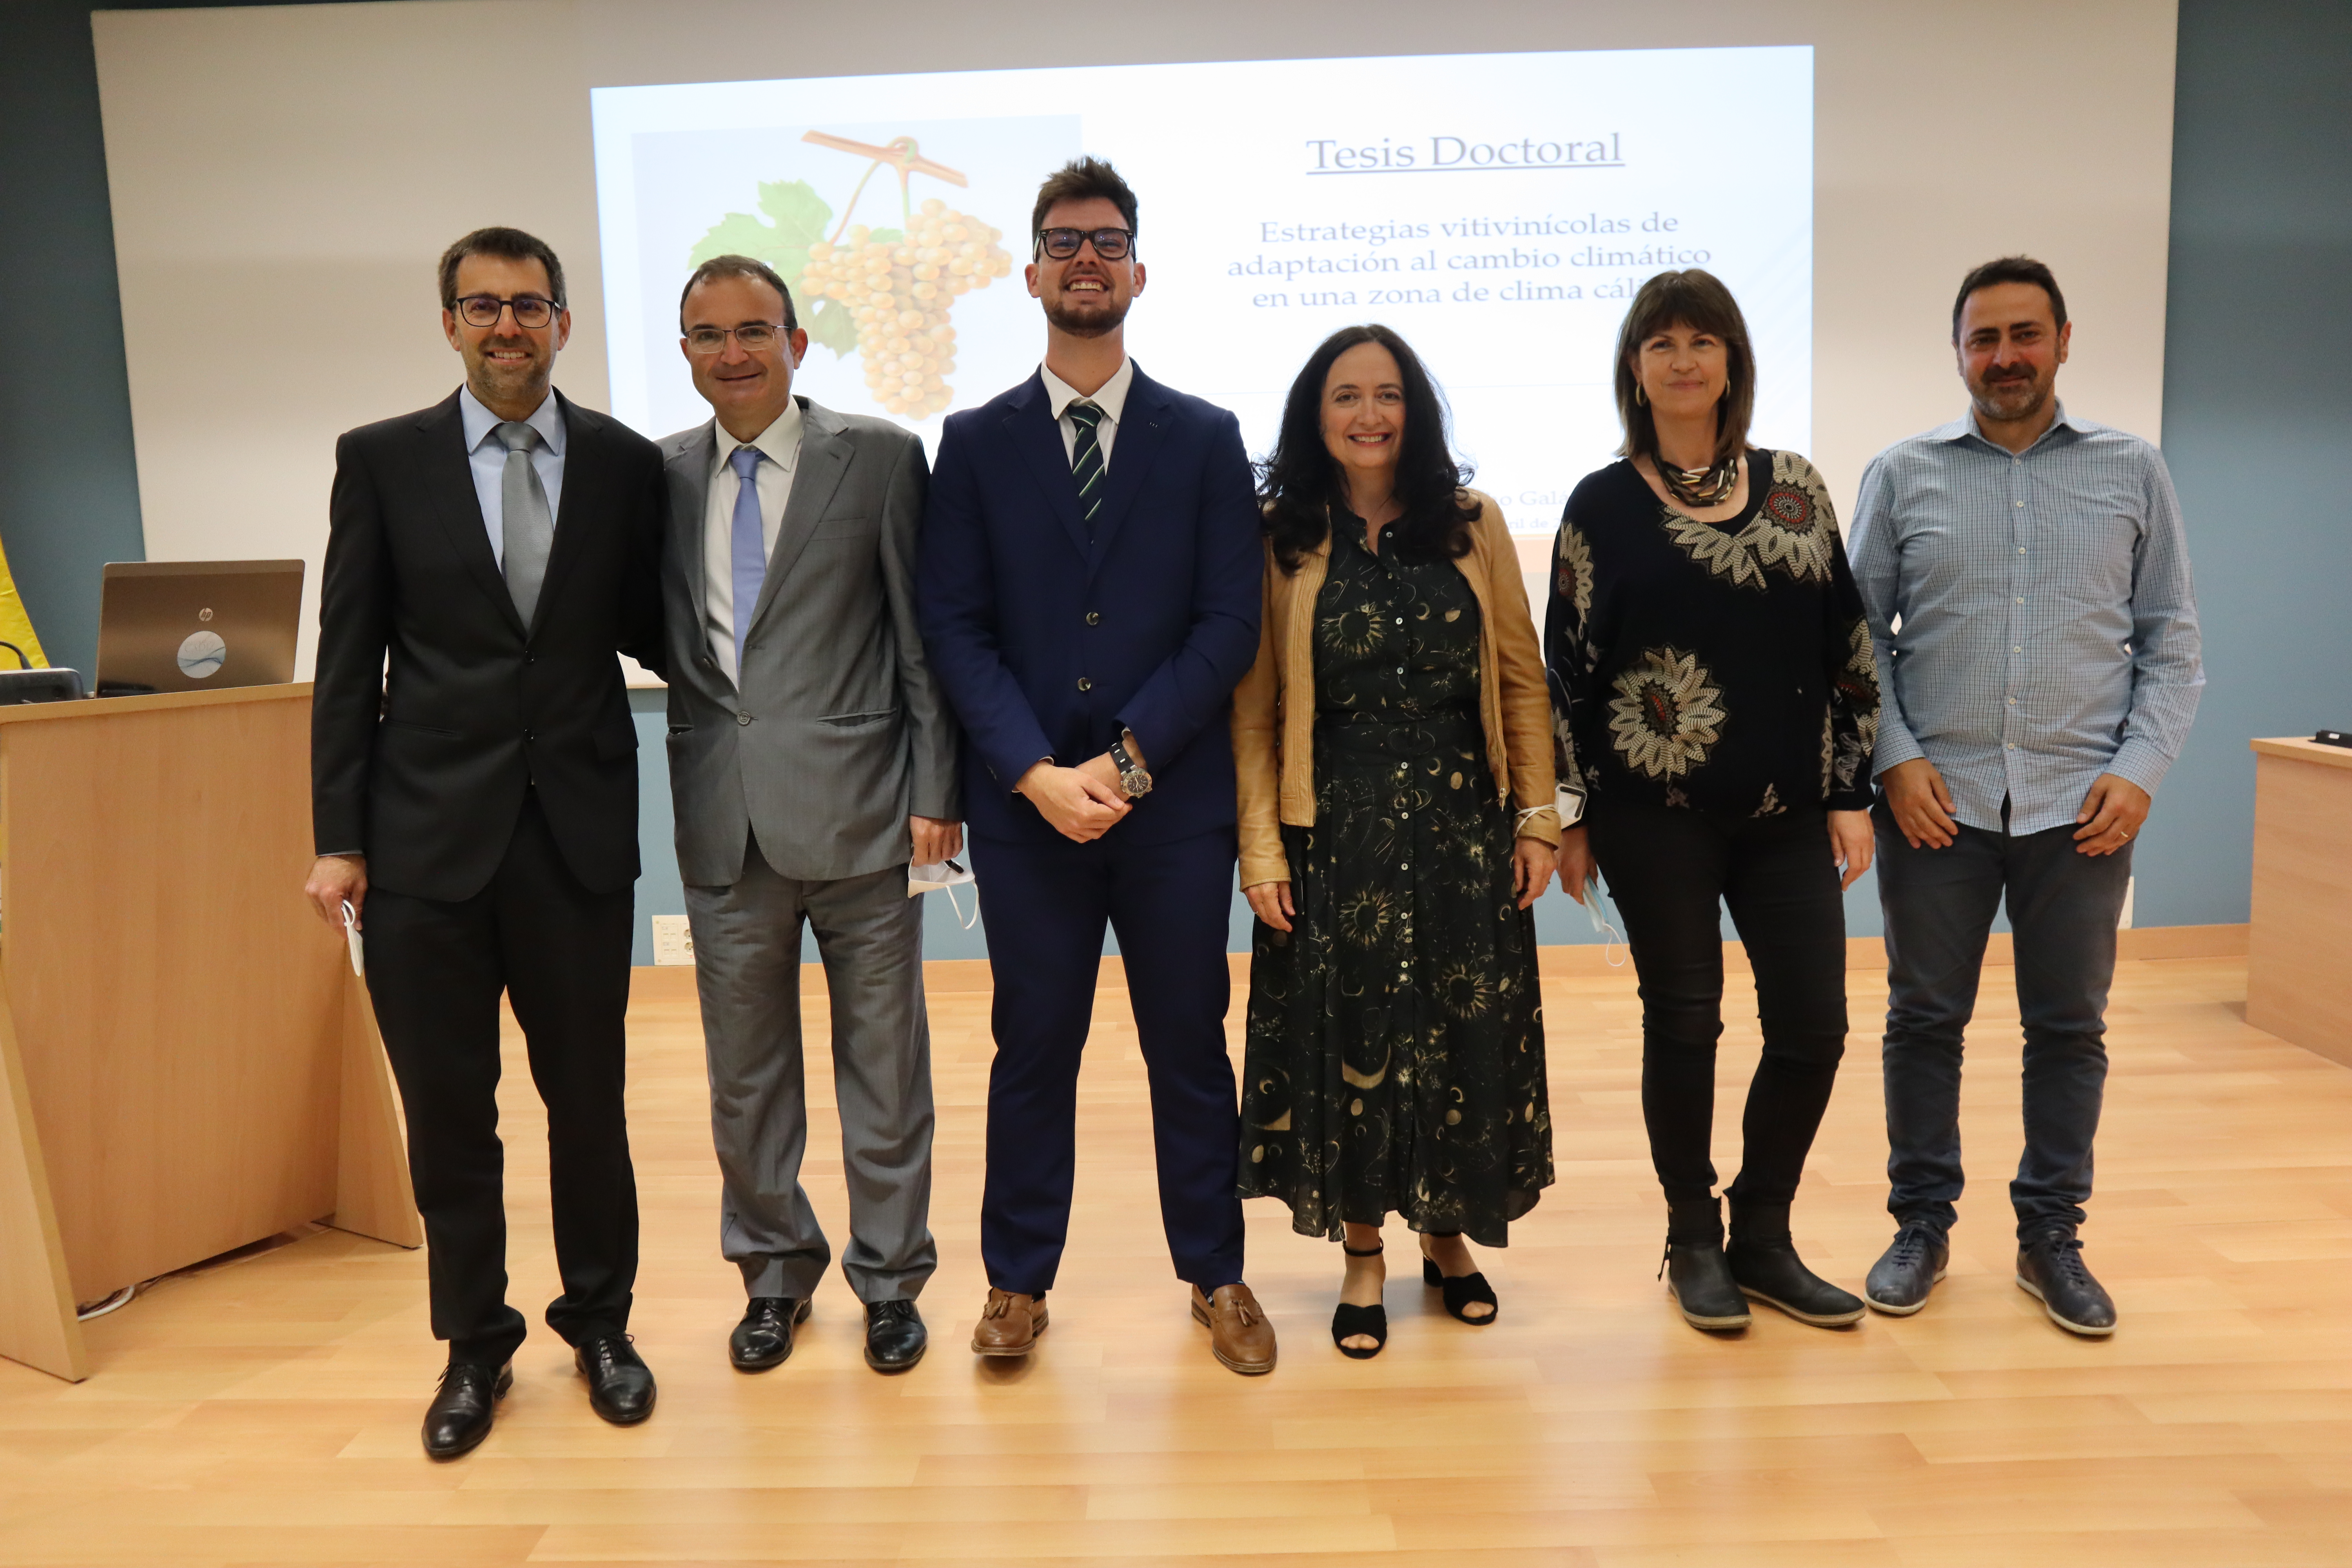 Thesis defense of “Viticultural Strategies for Adaptation to Climate Change in a Warm Climate Zone”